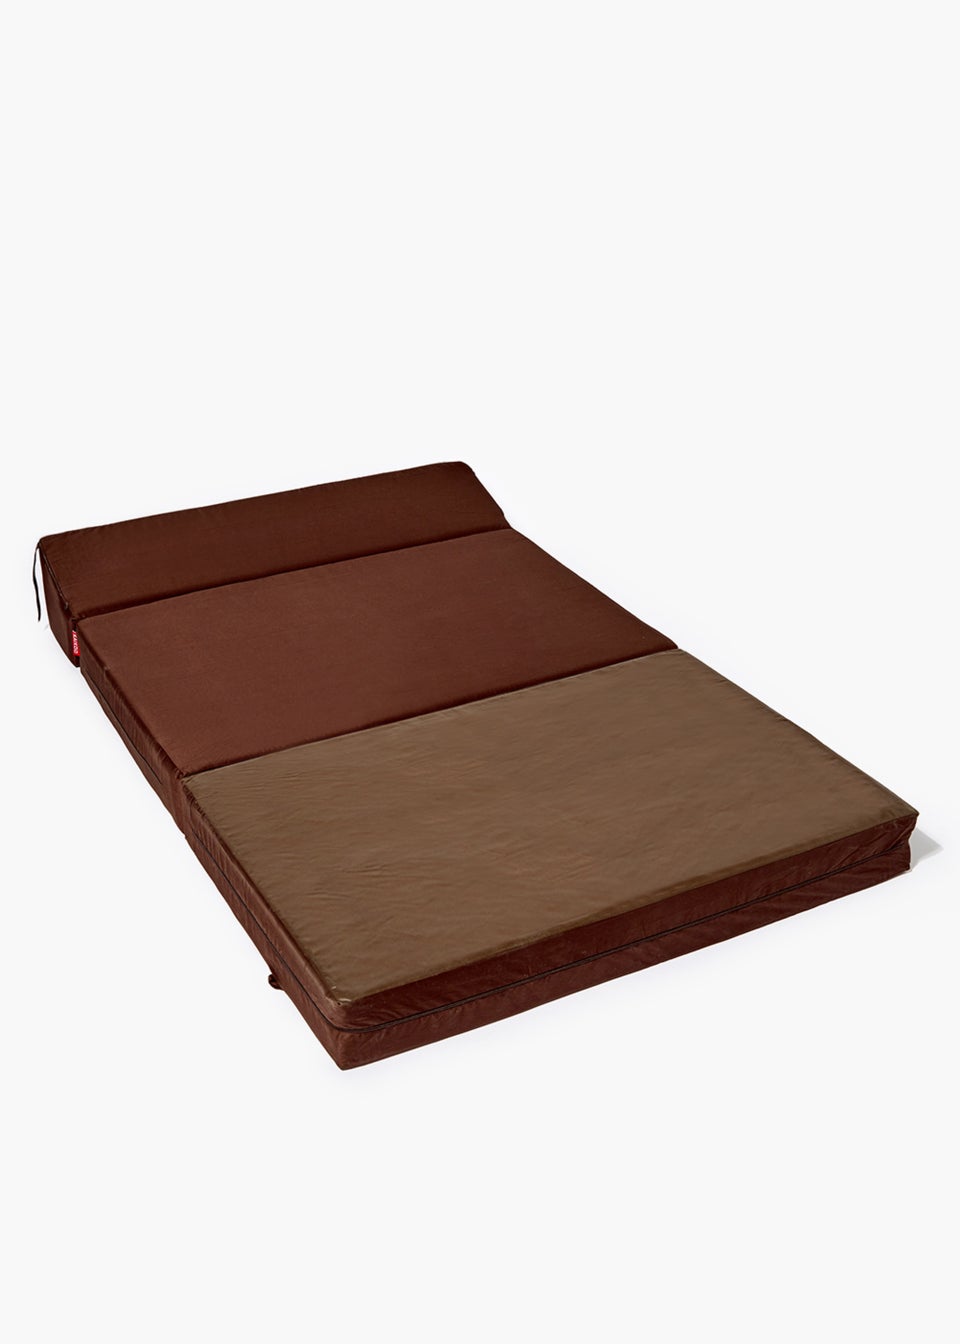 Kaikoo Double Fold-Out Chair Bed Chocolate